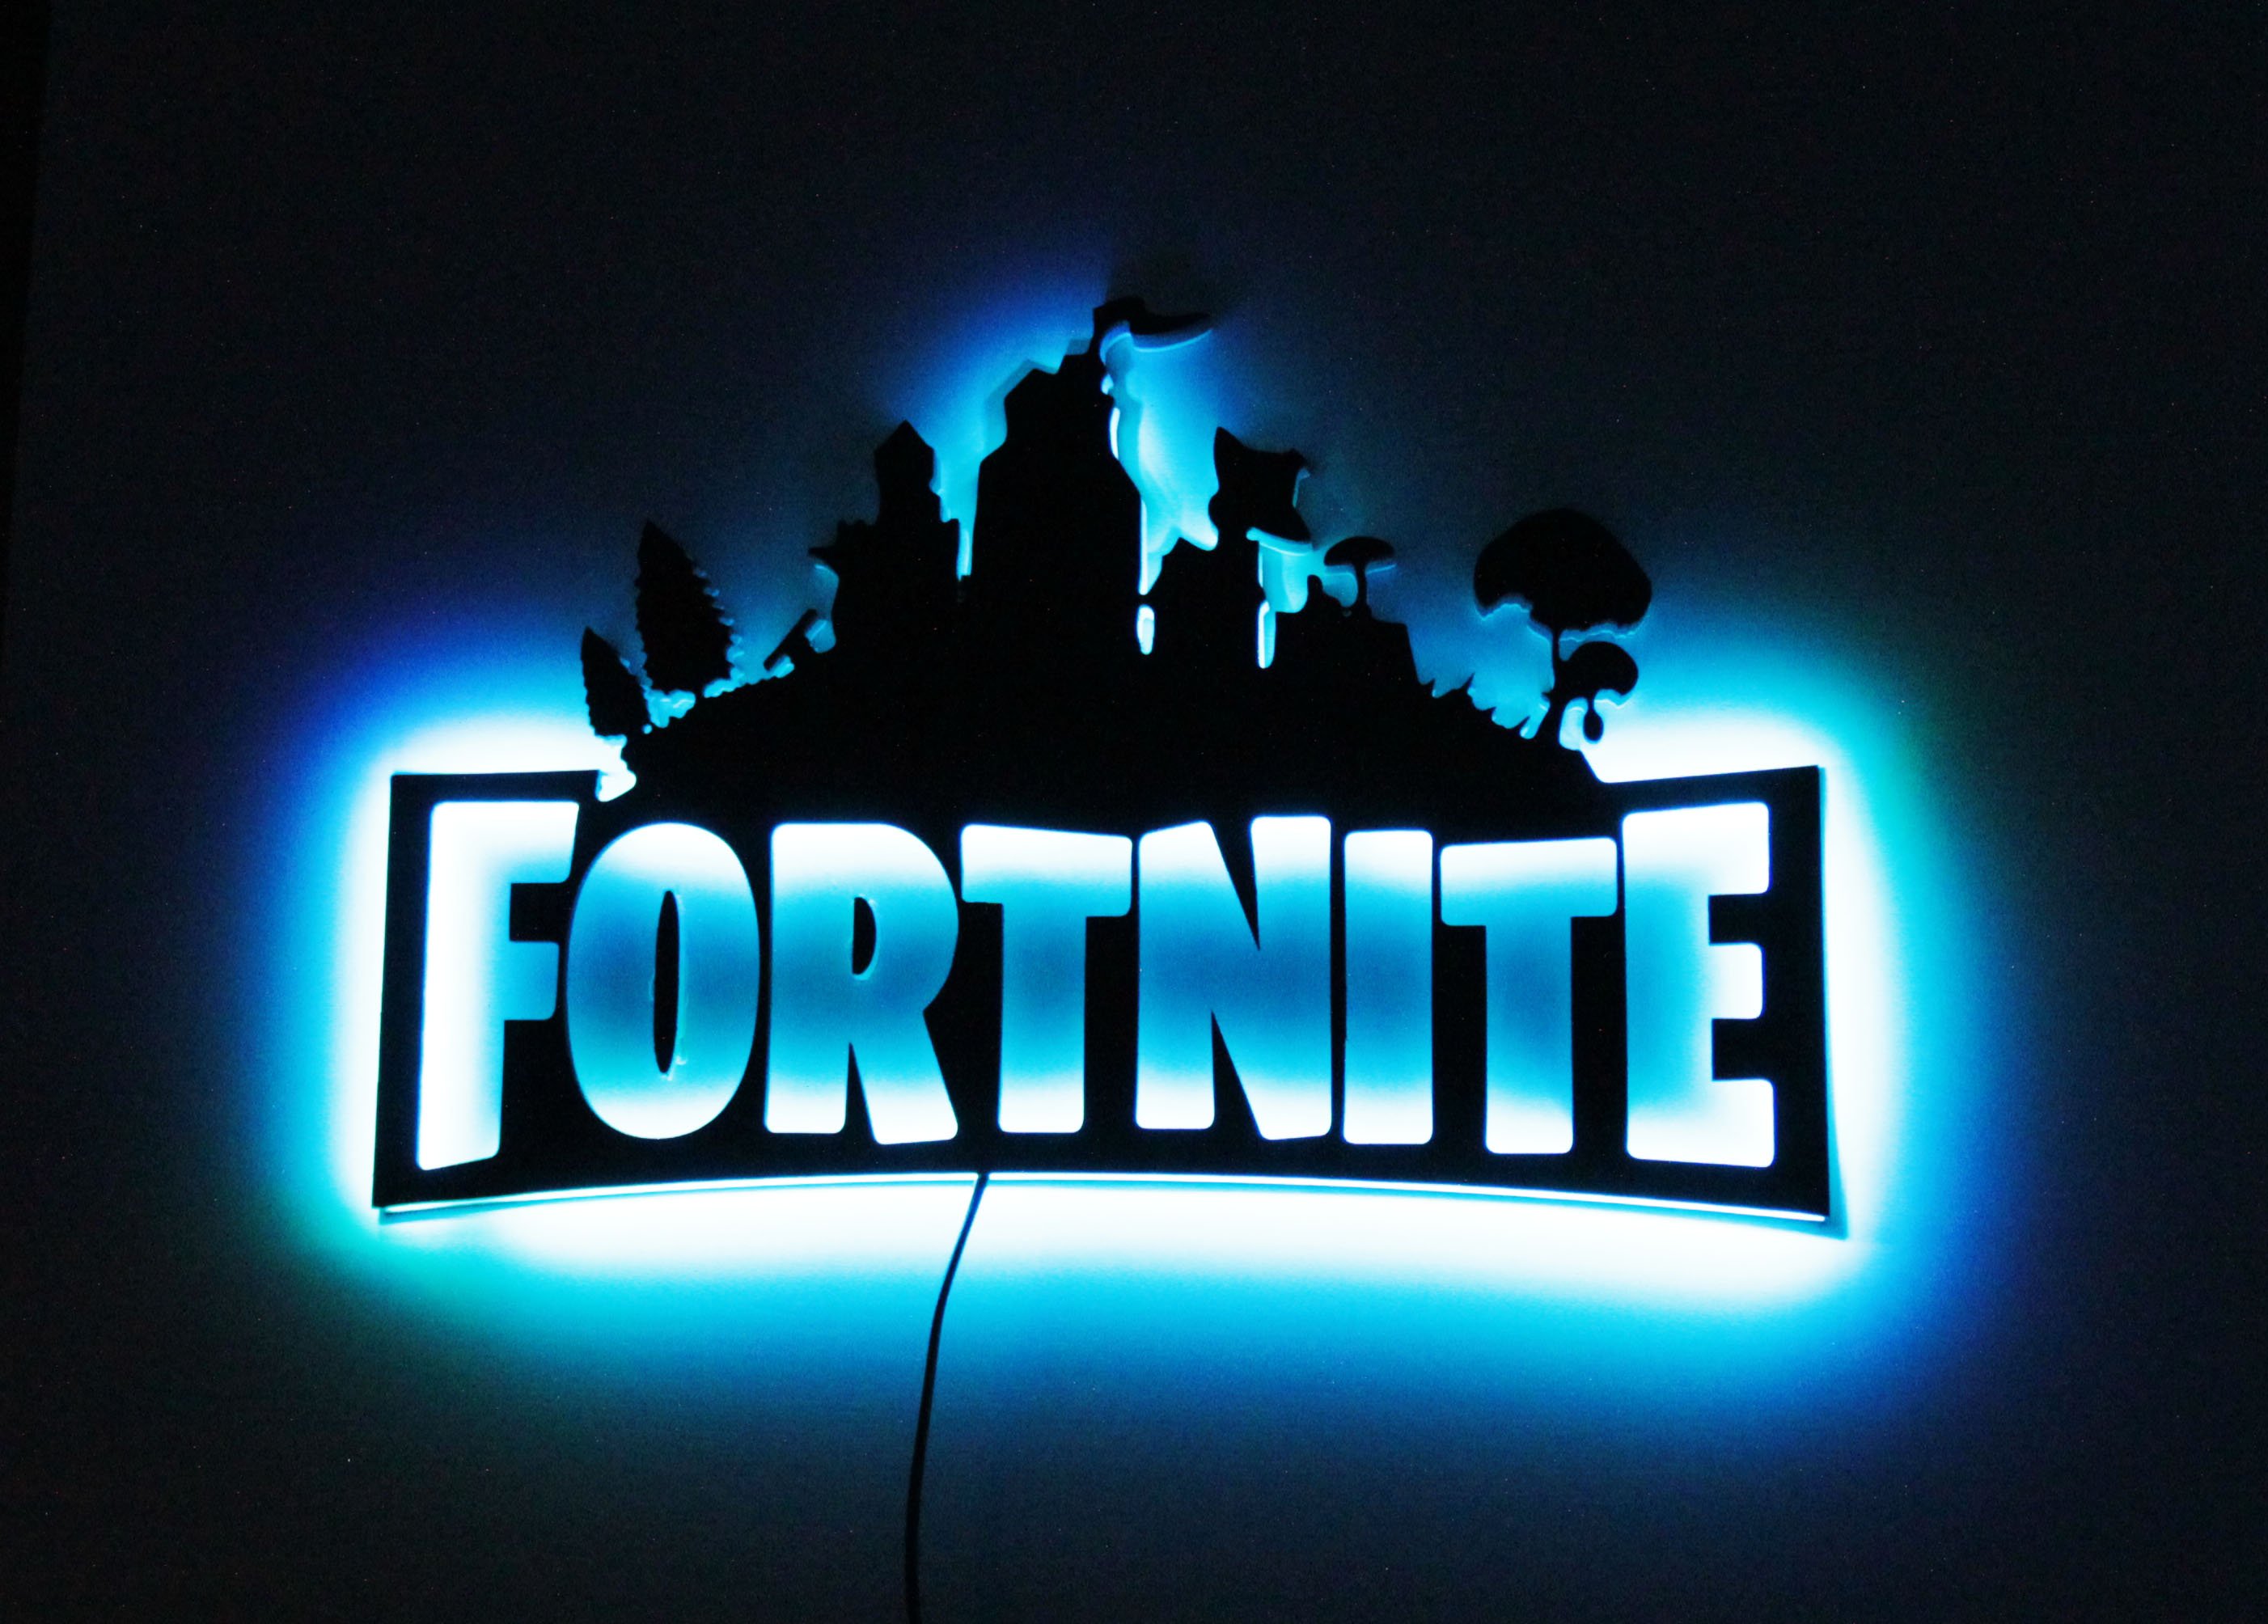 Papua Ny Guinea Mus nål SolovevStore on Twitter: "Fortnite wall mounted LED light (night lights).  Material: Plywood 6mm thick. Dimensions (mm): 500 x 350 mm (19.7 x 14 in).  #gameslogo #sign #Wood #nightlight #wallart #game #customlamp #Fortnitegift  #